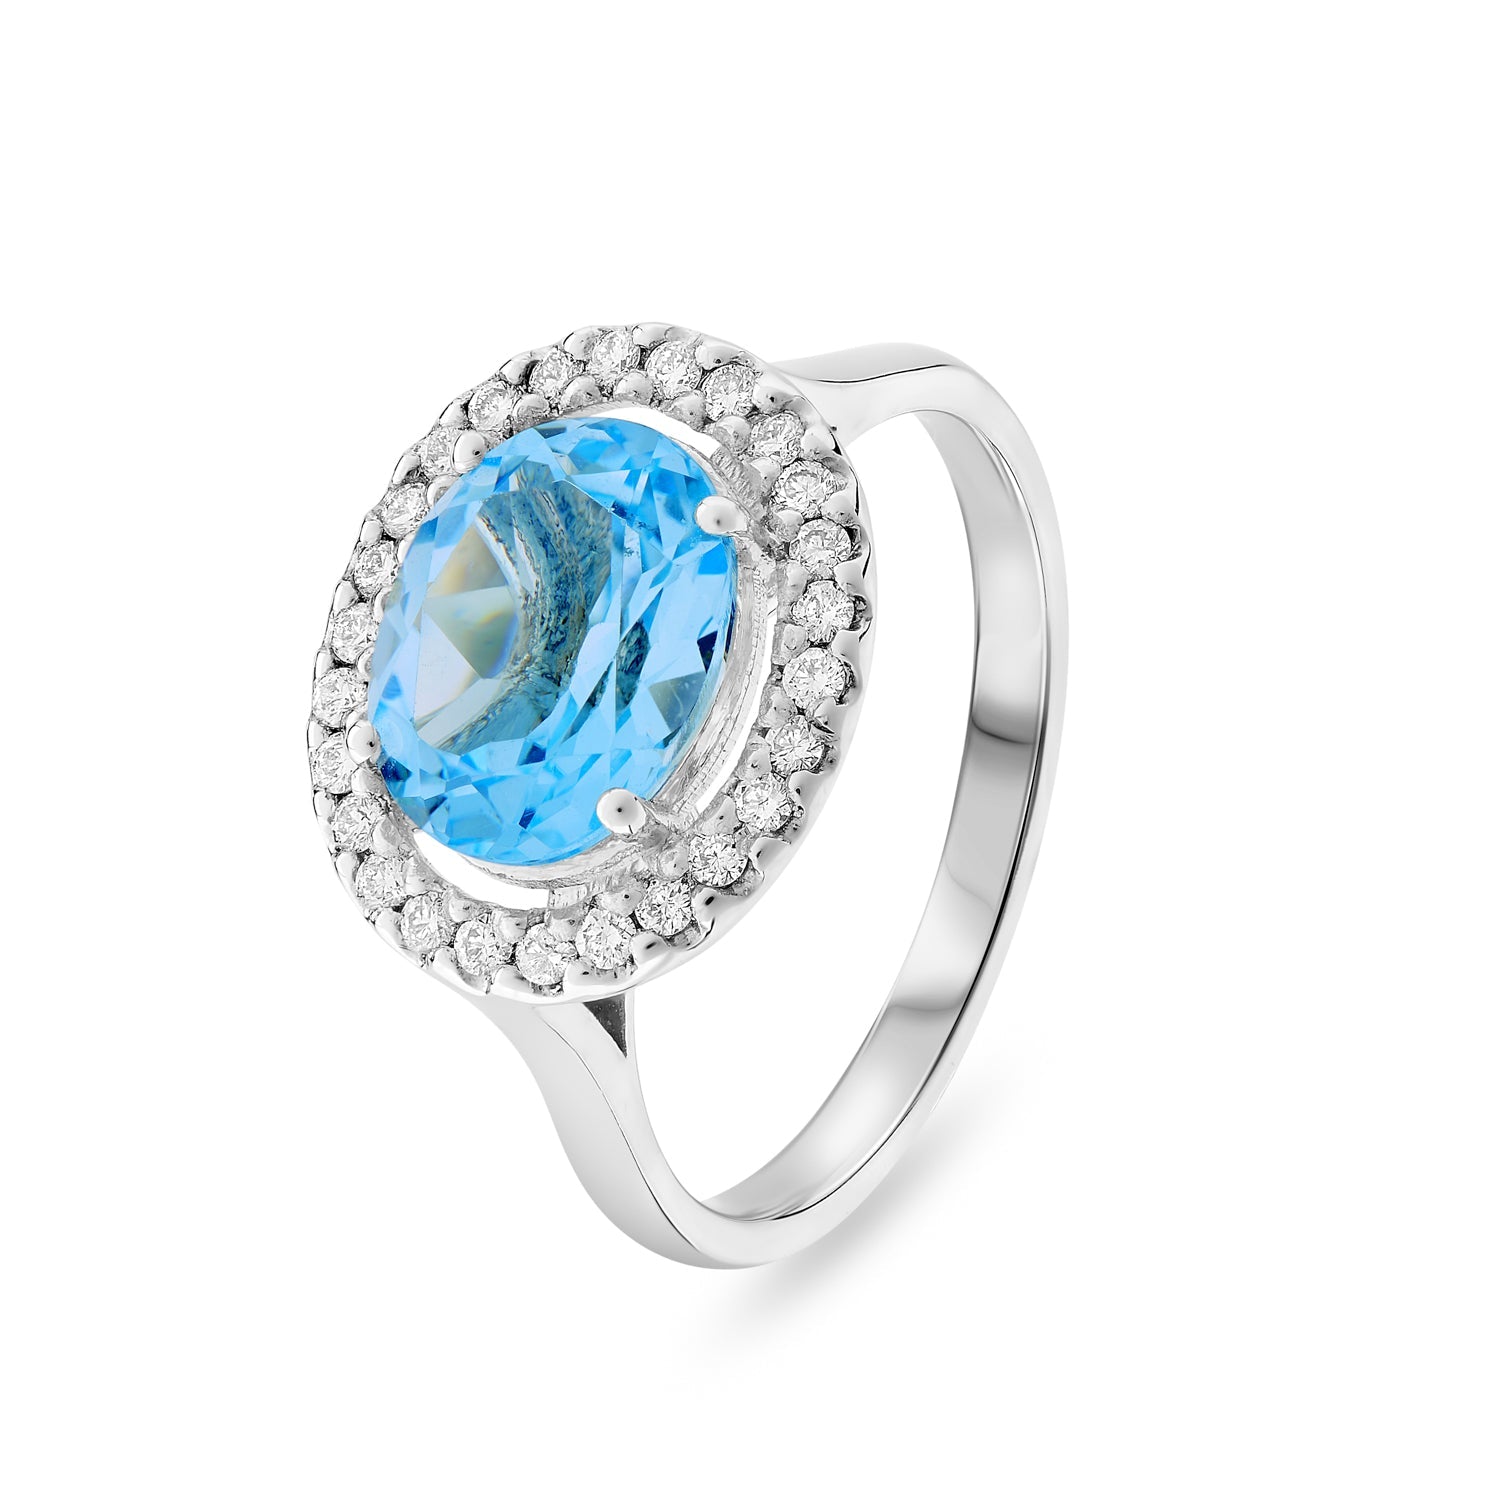 Diamond and Blue Topaz Halo Cluster Ring c.0.26ct